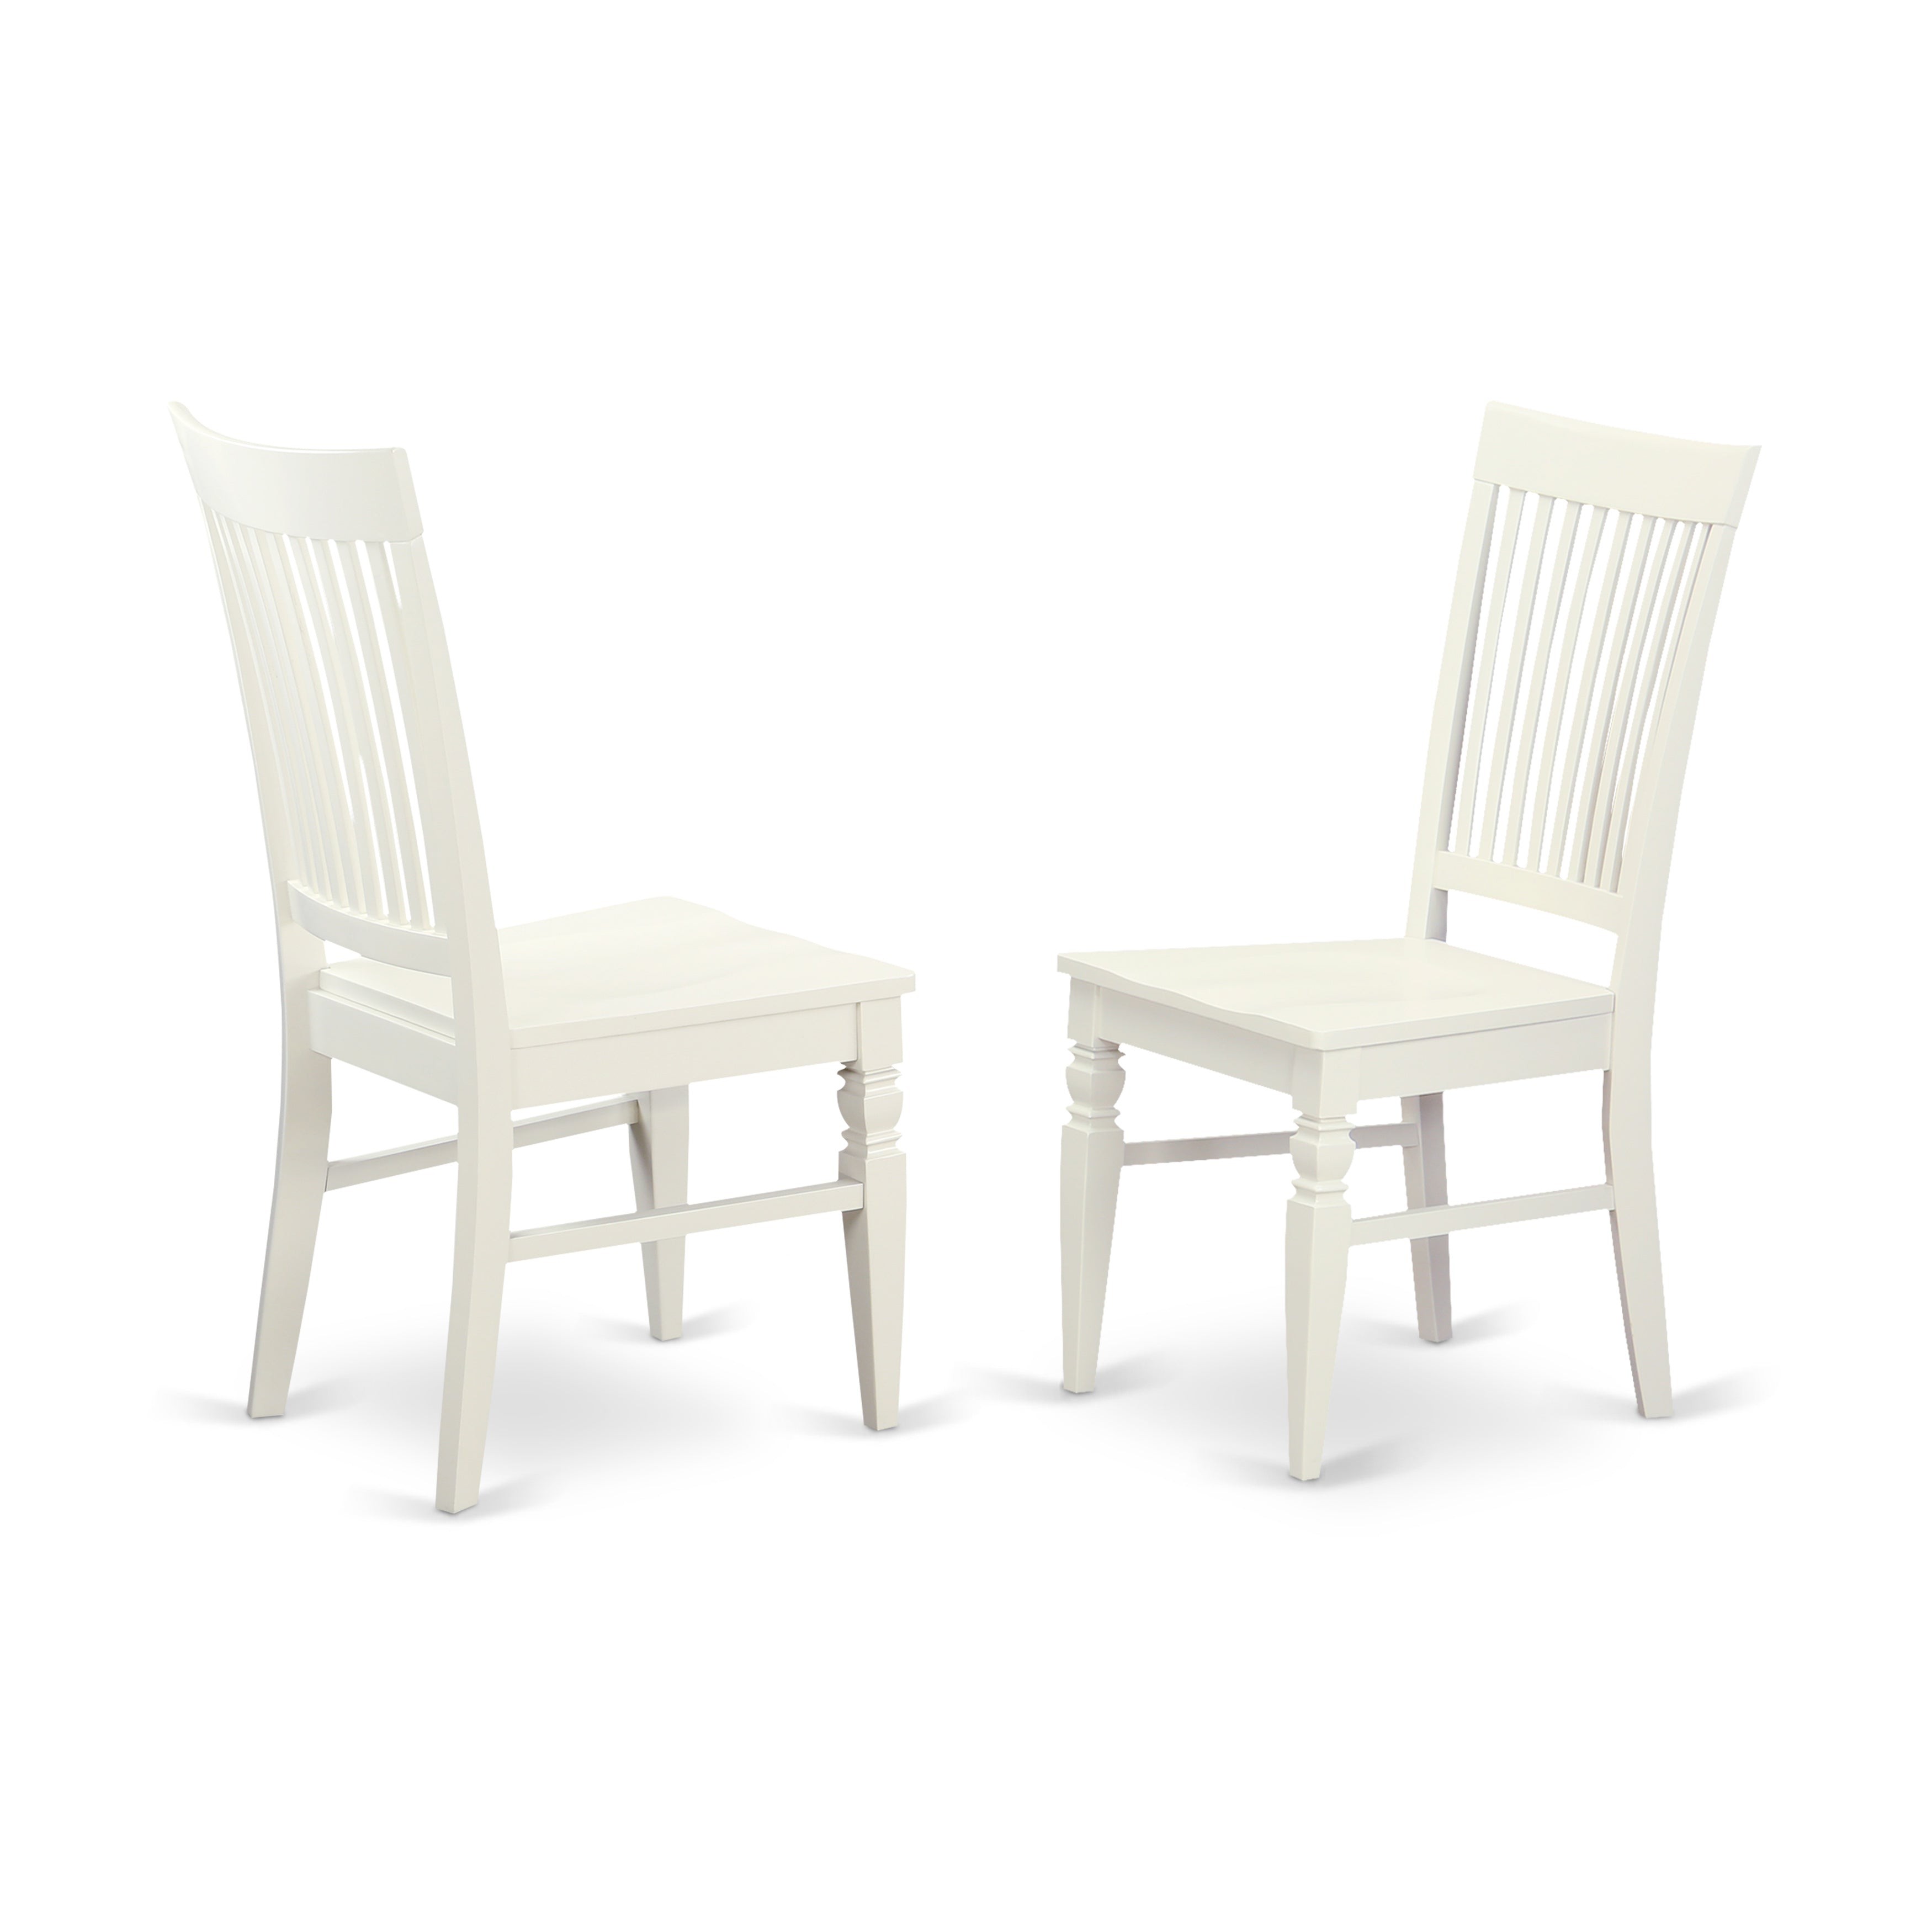 HLWE3-LWH-W 3 Pc set with a Round Dinette Table and 2 Leather Kitchen Chairs in Linen White